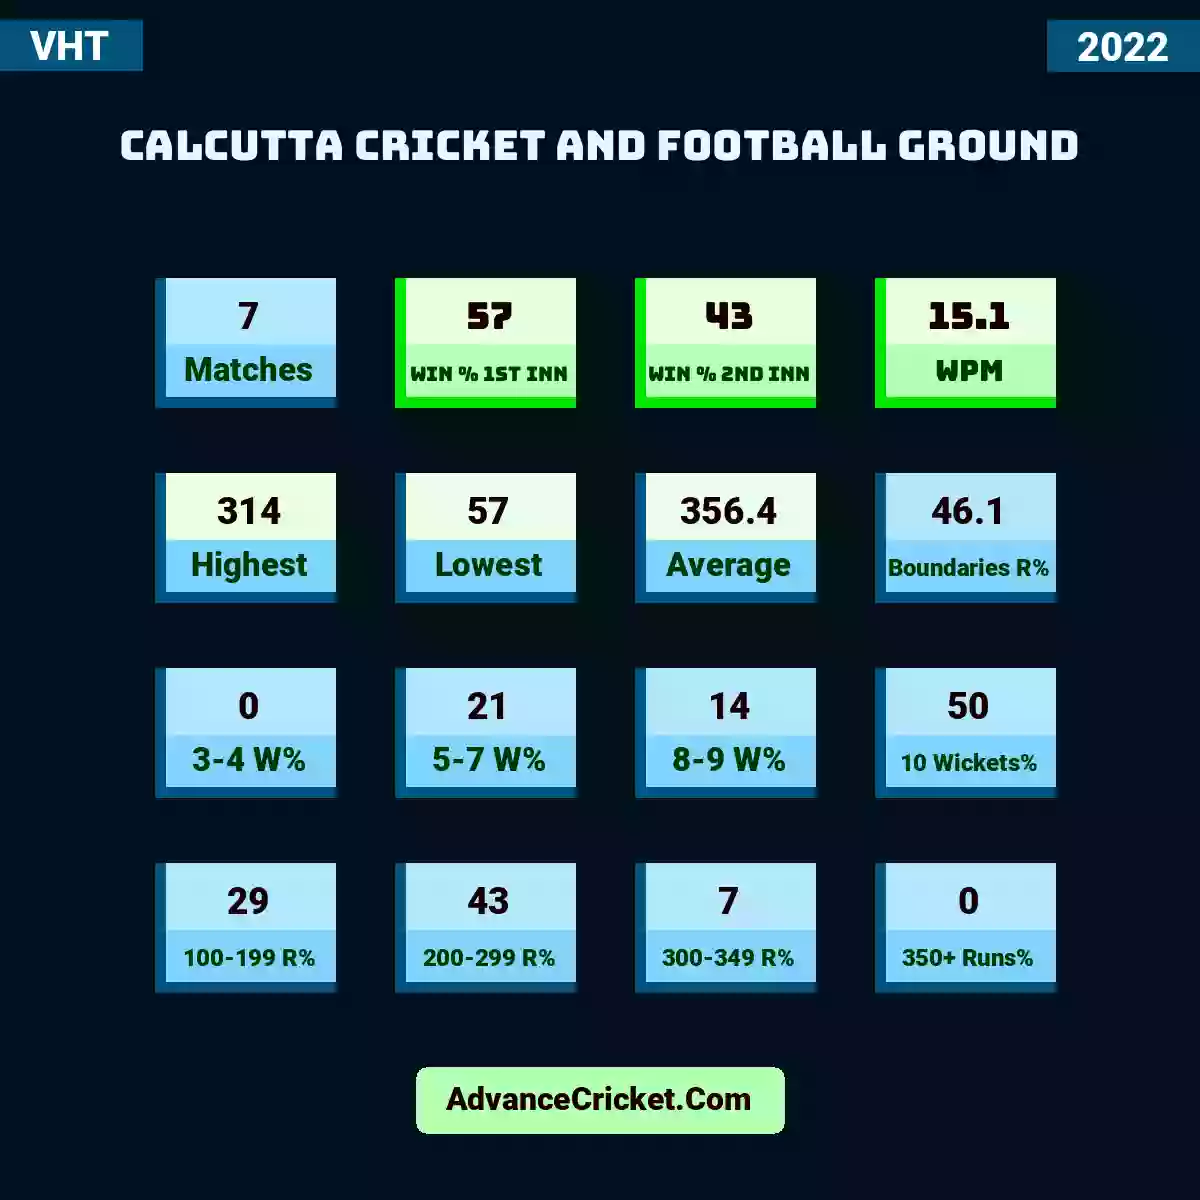 Image showing Calcutta Cricket and Football Ground with Matches: 7, Win % 1st Inn: 57, Win % 2nd Inn: 43, WPM: 15.1, Highest: 314, Lowest: 57, Average: 356.4, Boundaries R%: 46.1, 3-4 W%: 0, 5-7 W%: 21, 8-9 W%: 14, 10 Wickets%: 50, 100-199 R%: 29, 200-299 R%: 43, 300-349 R%: 7, 350+ Runs%: 0.